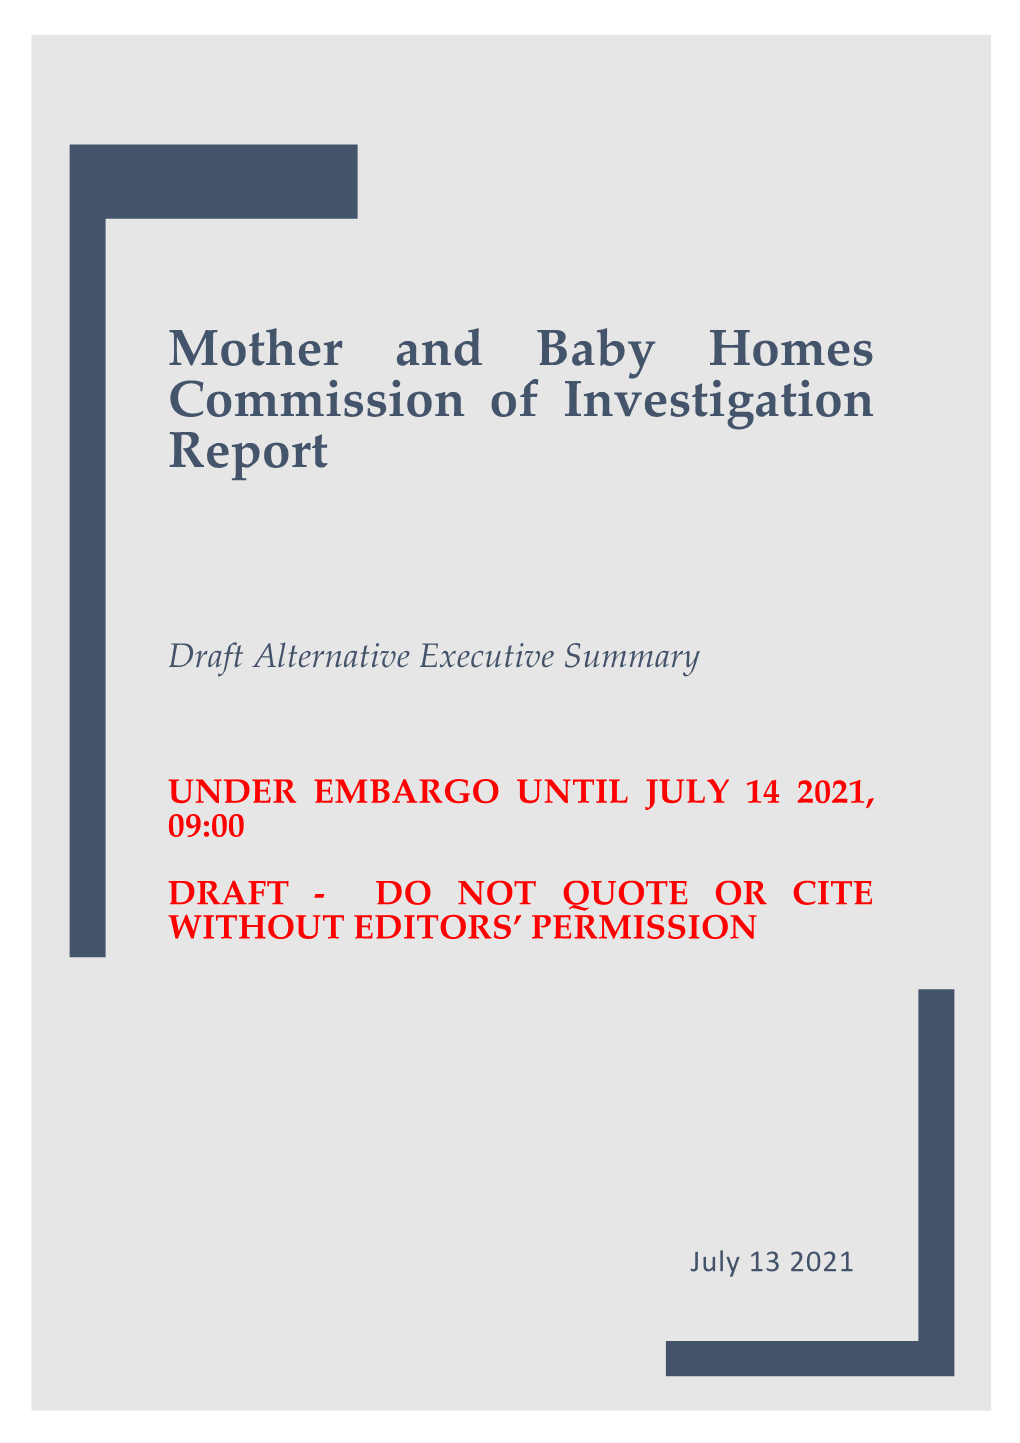 Mother and Baby Homes Commission of Investigation Report